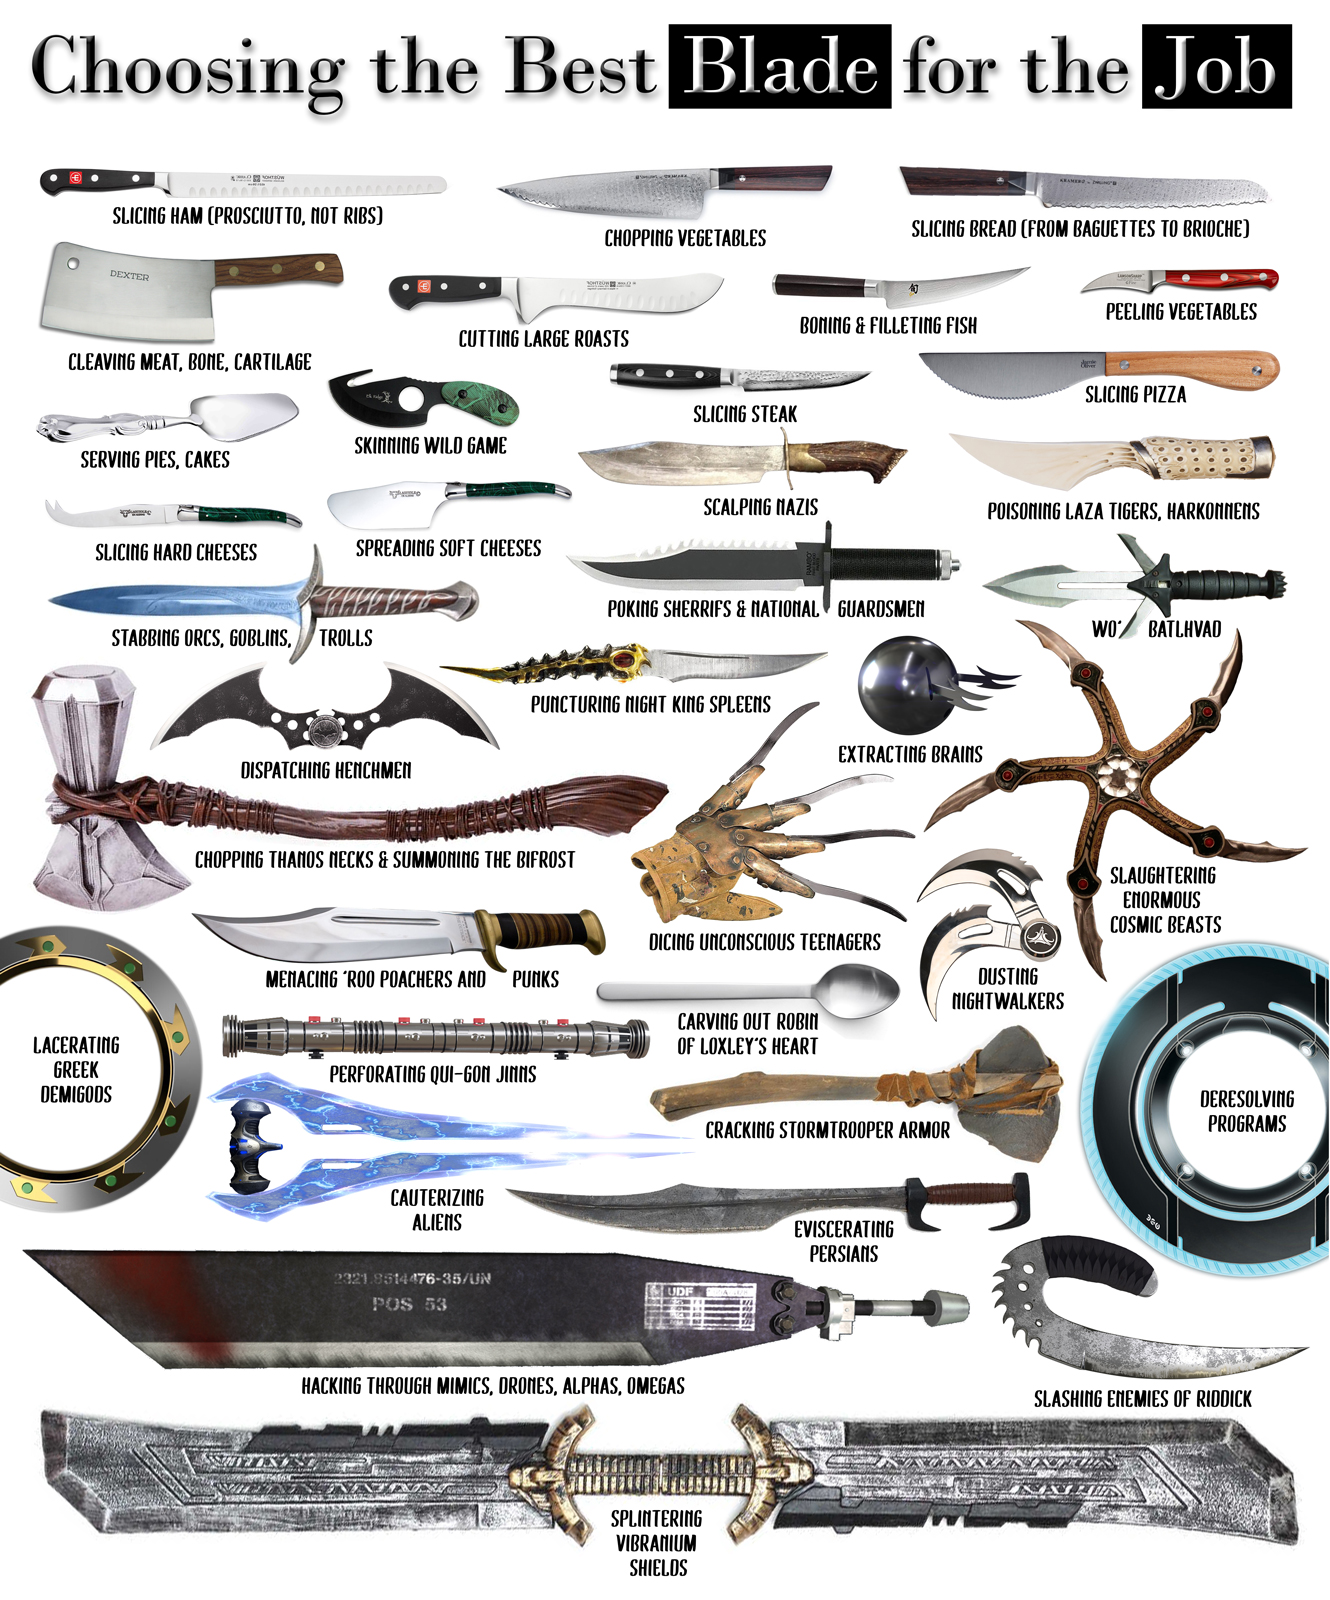 funny memes - Choosing the Best Blade for the job